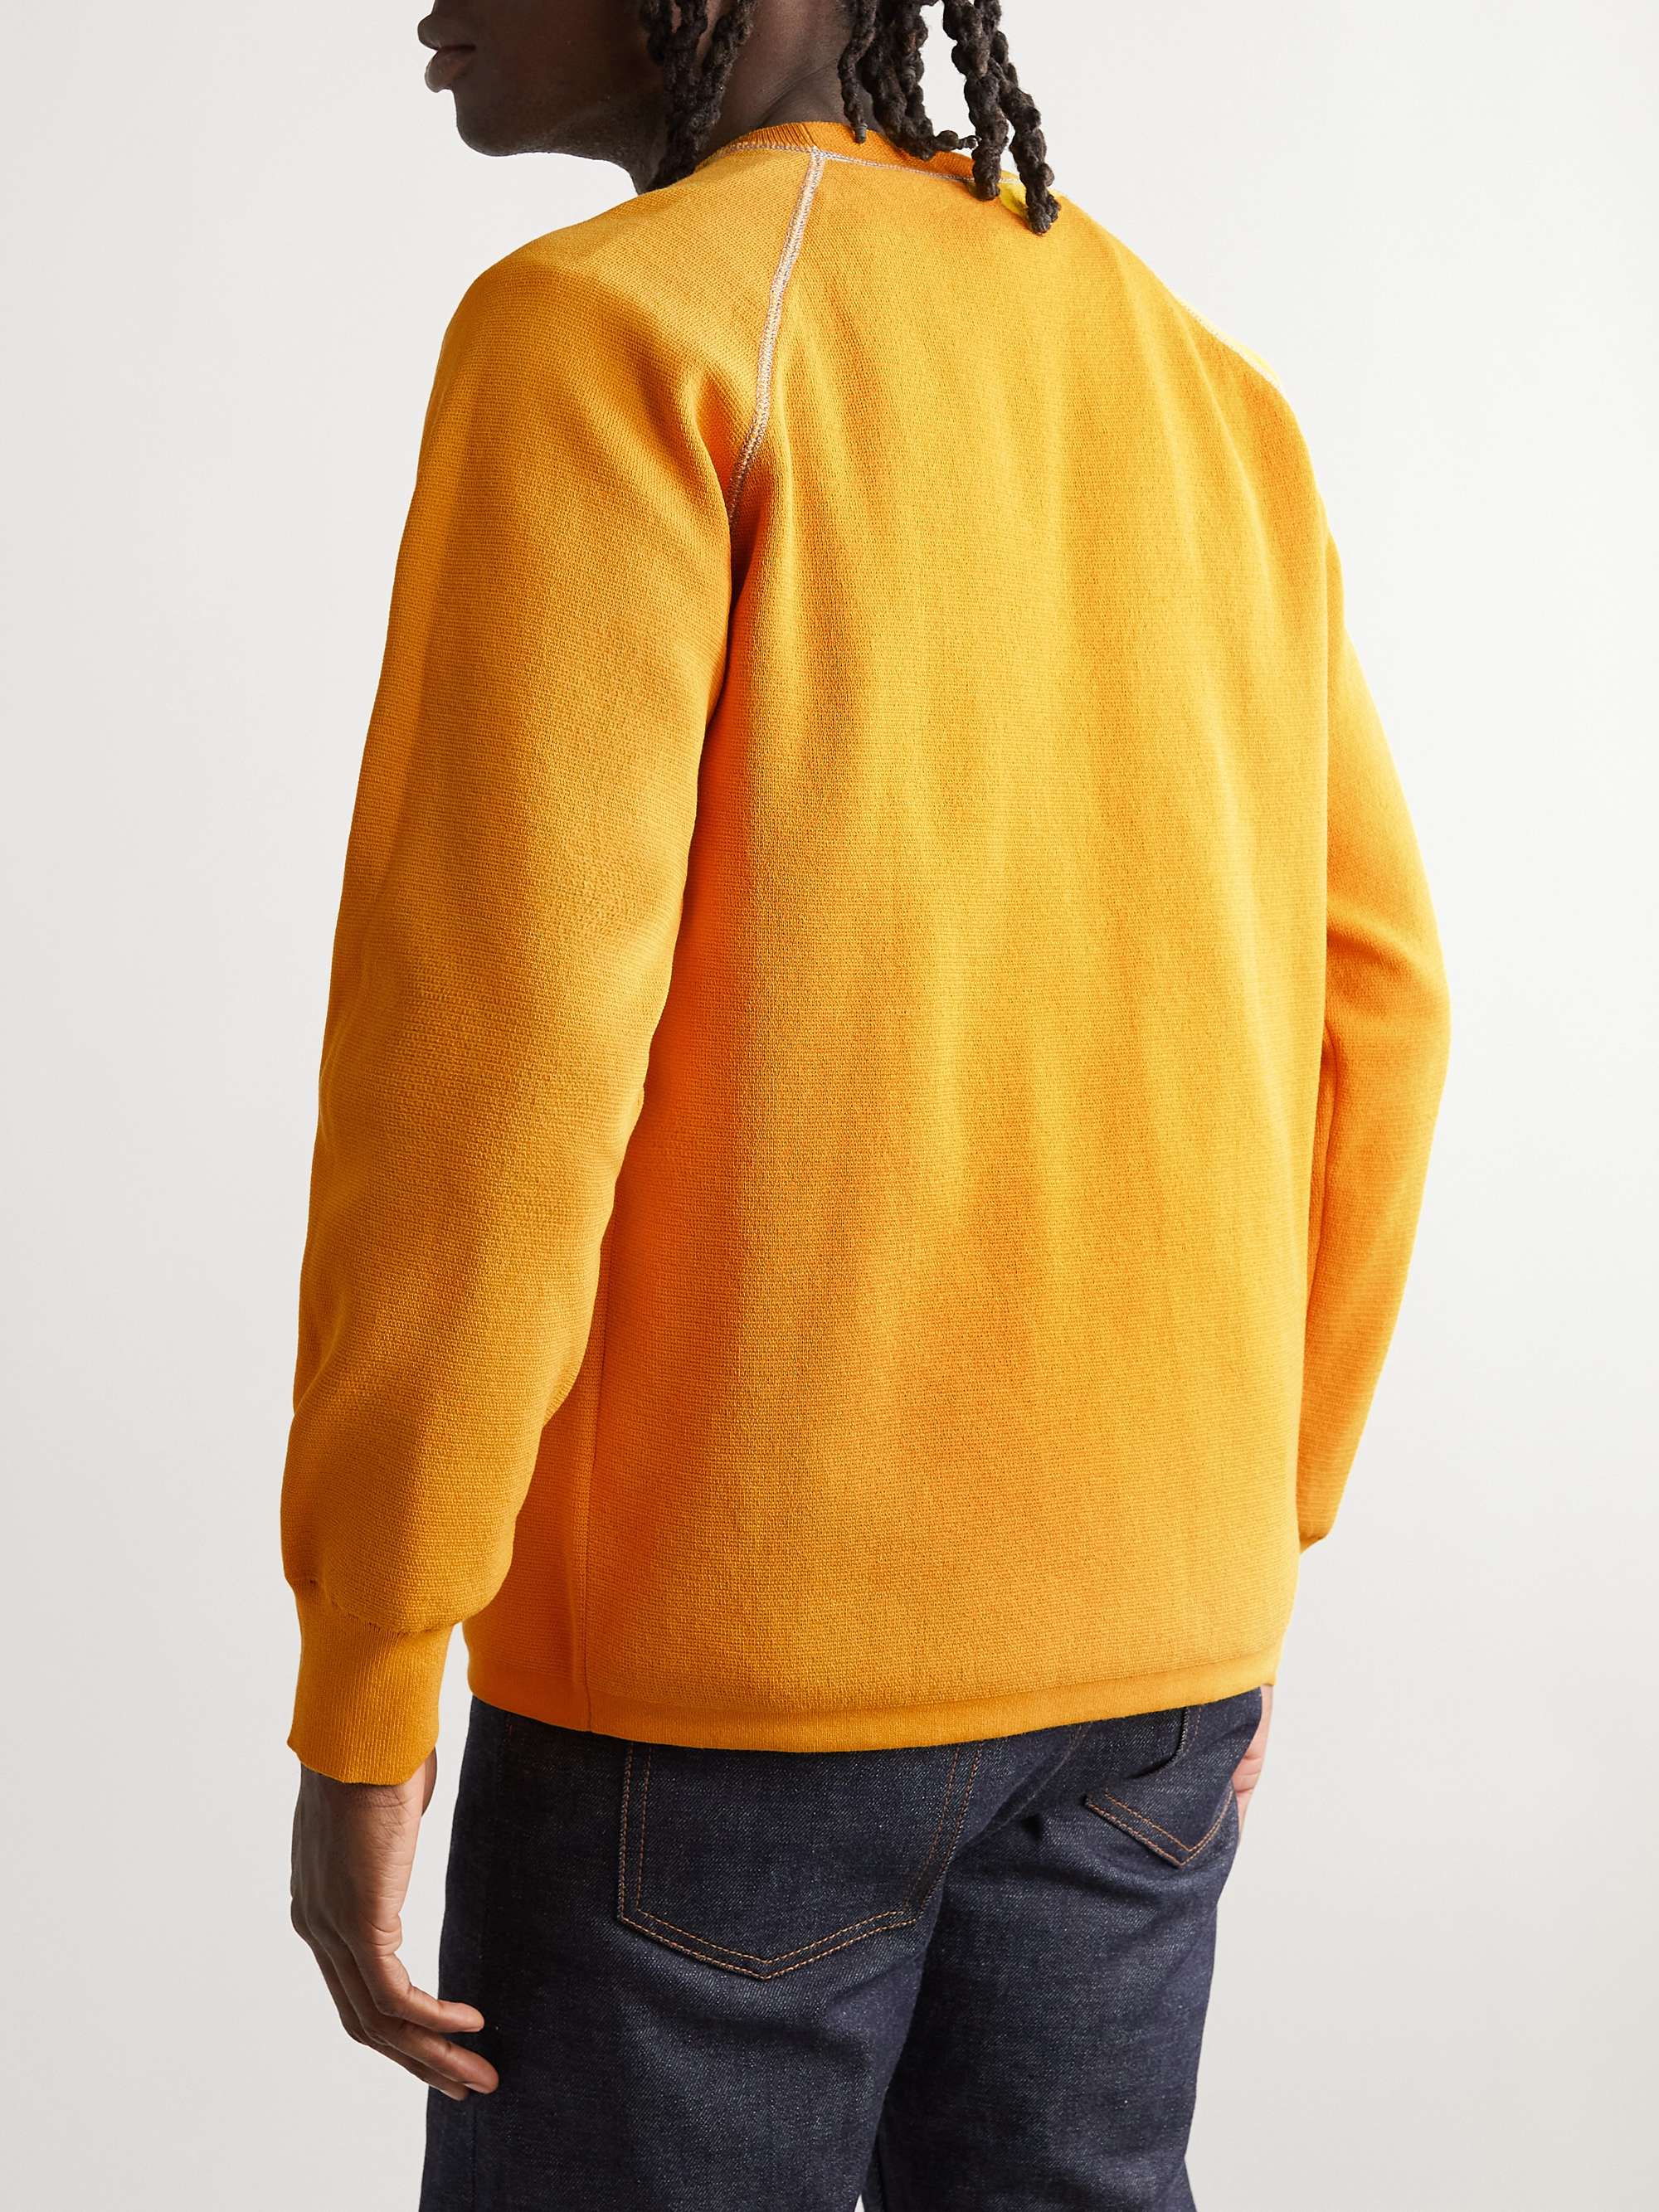 NORSE PROJECTS Tate Cotton-Blend Sweater